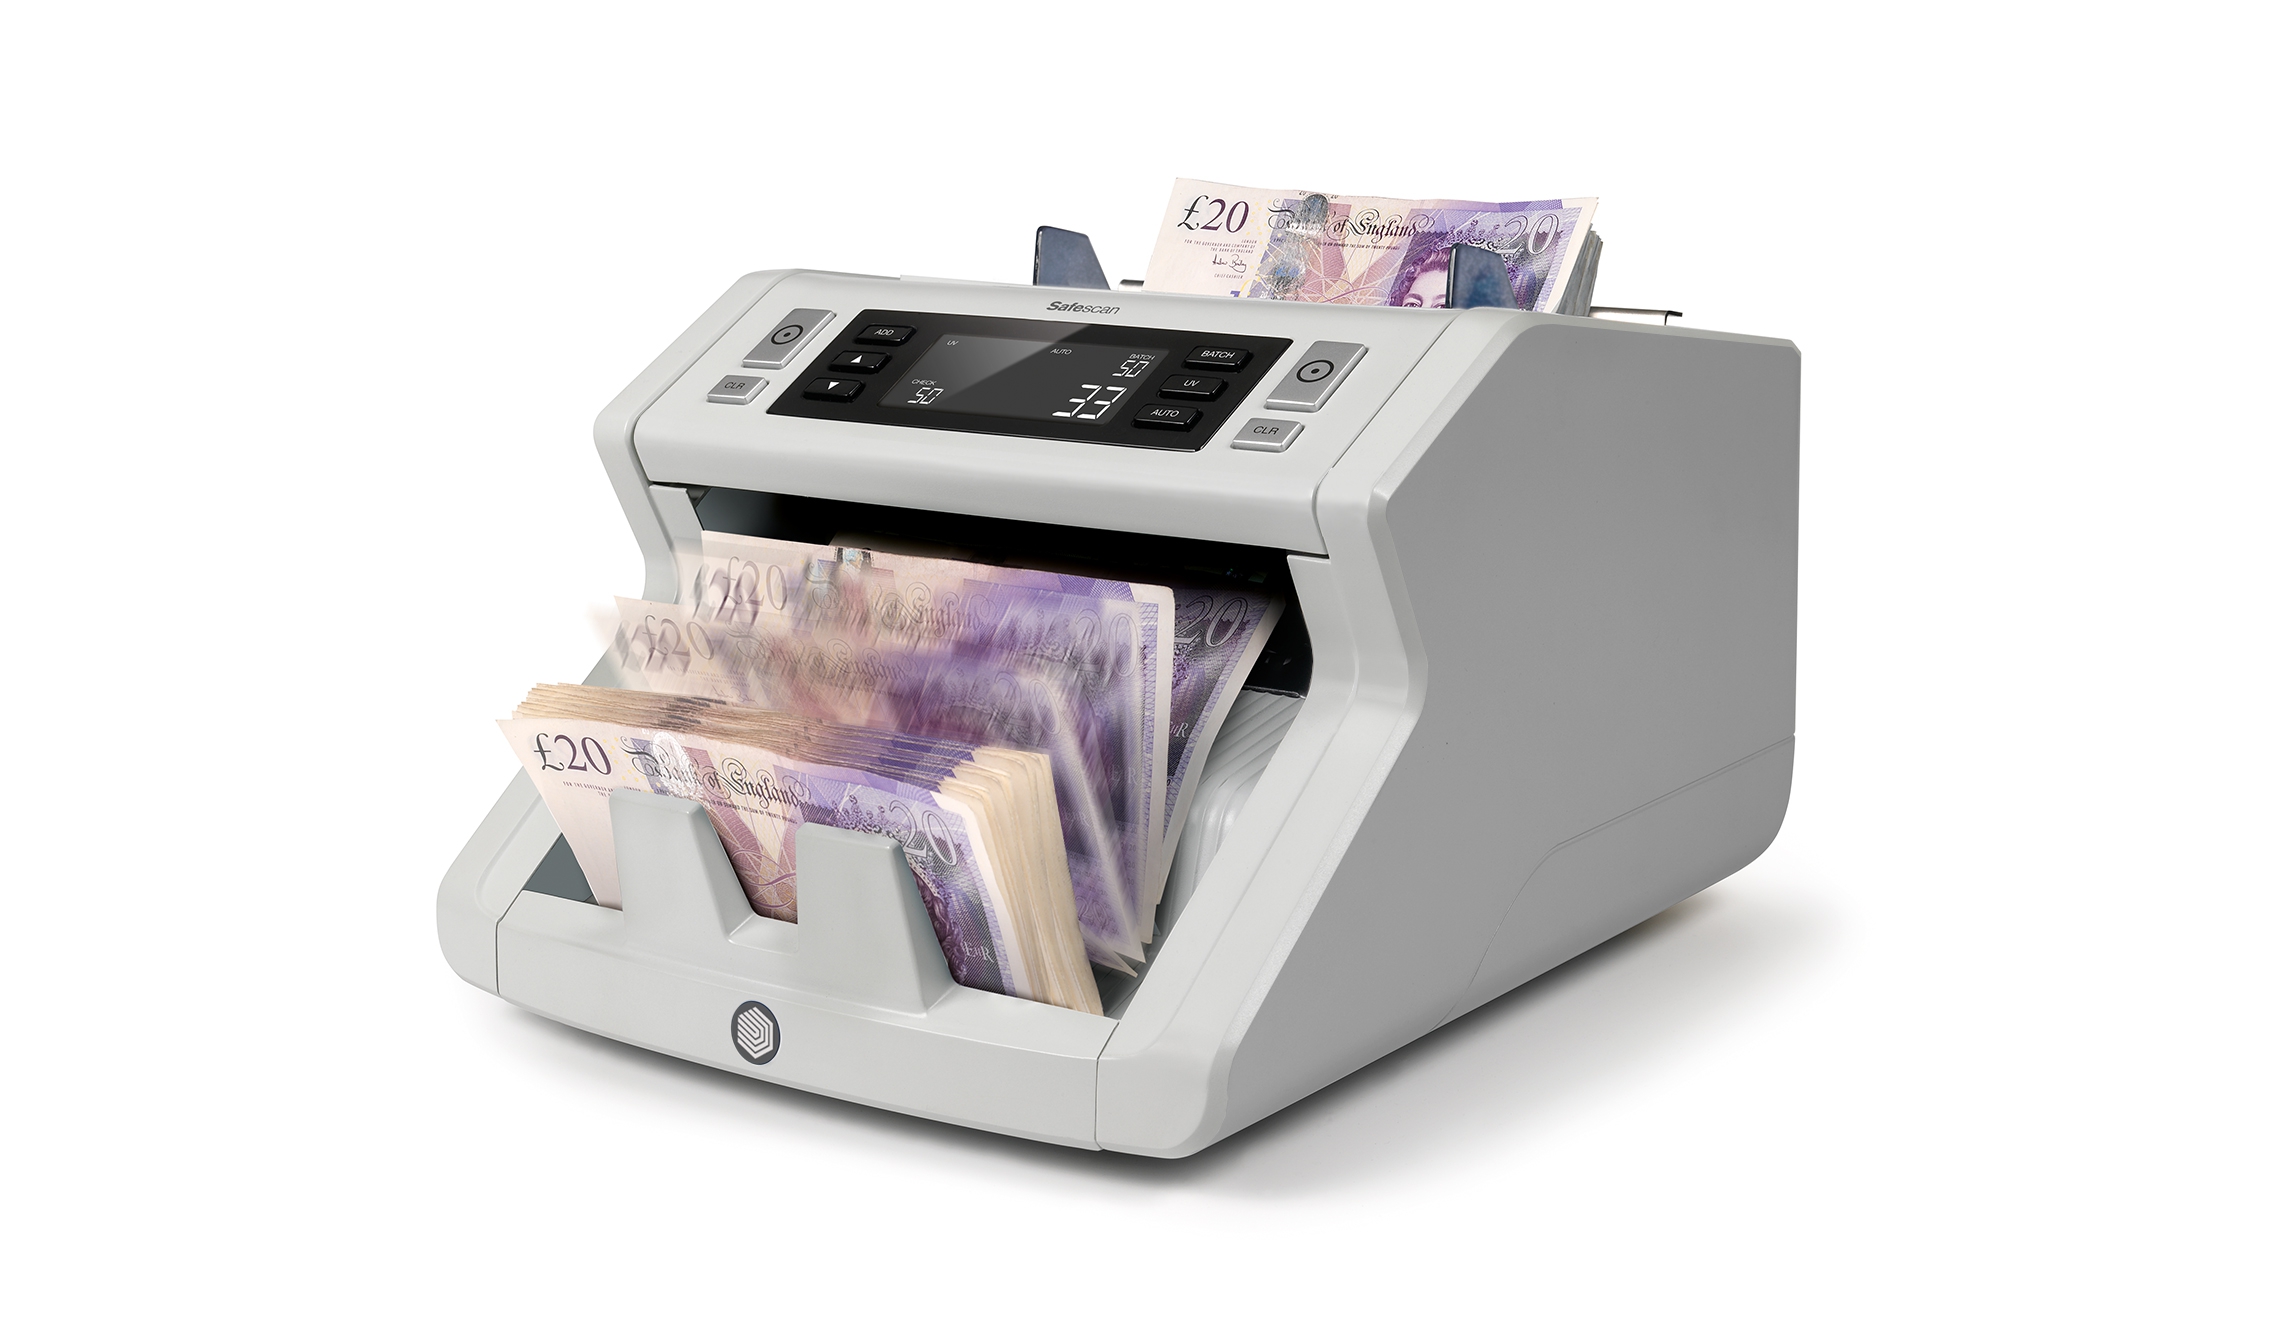 Safescan 2210 Automatic Bank Note Counter